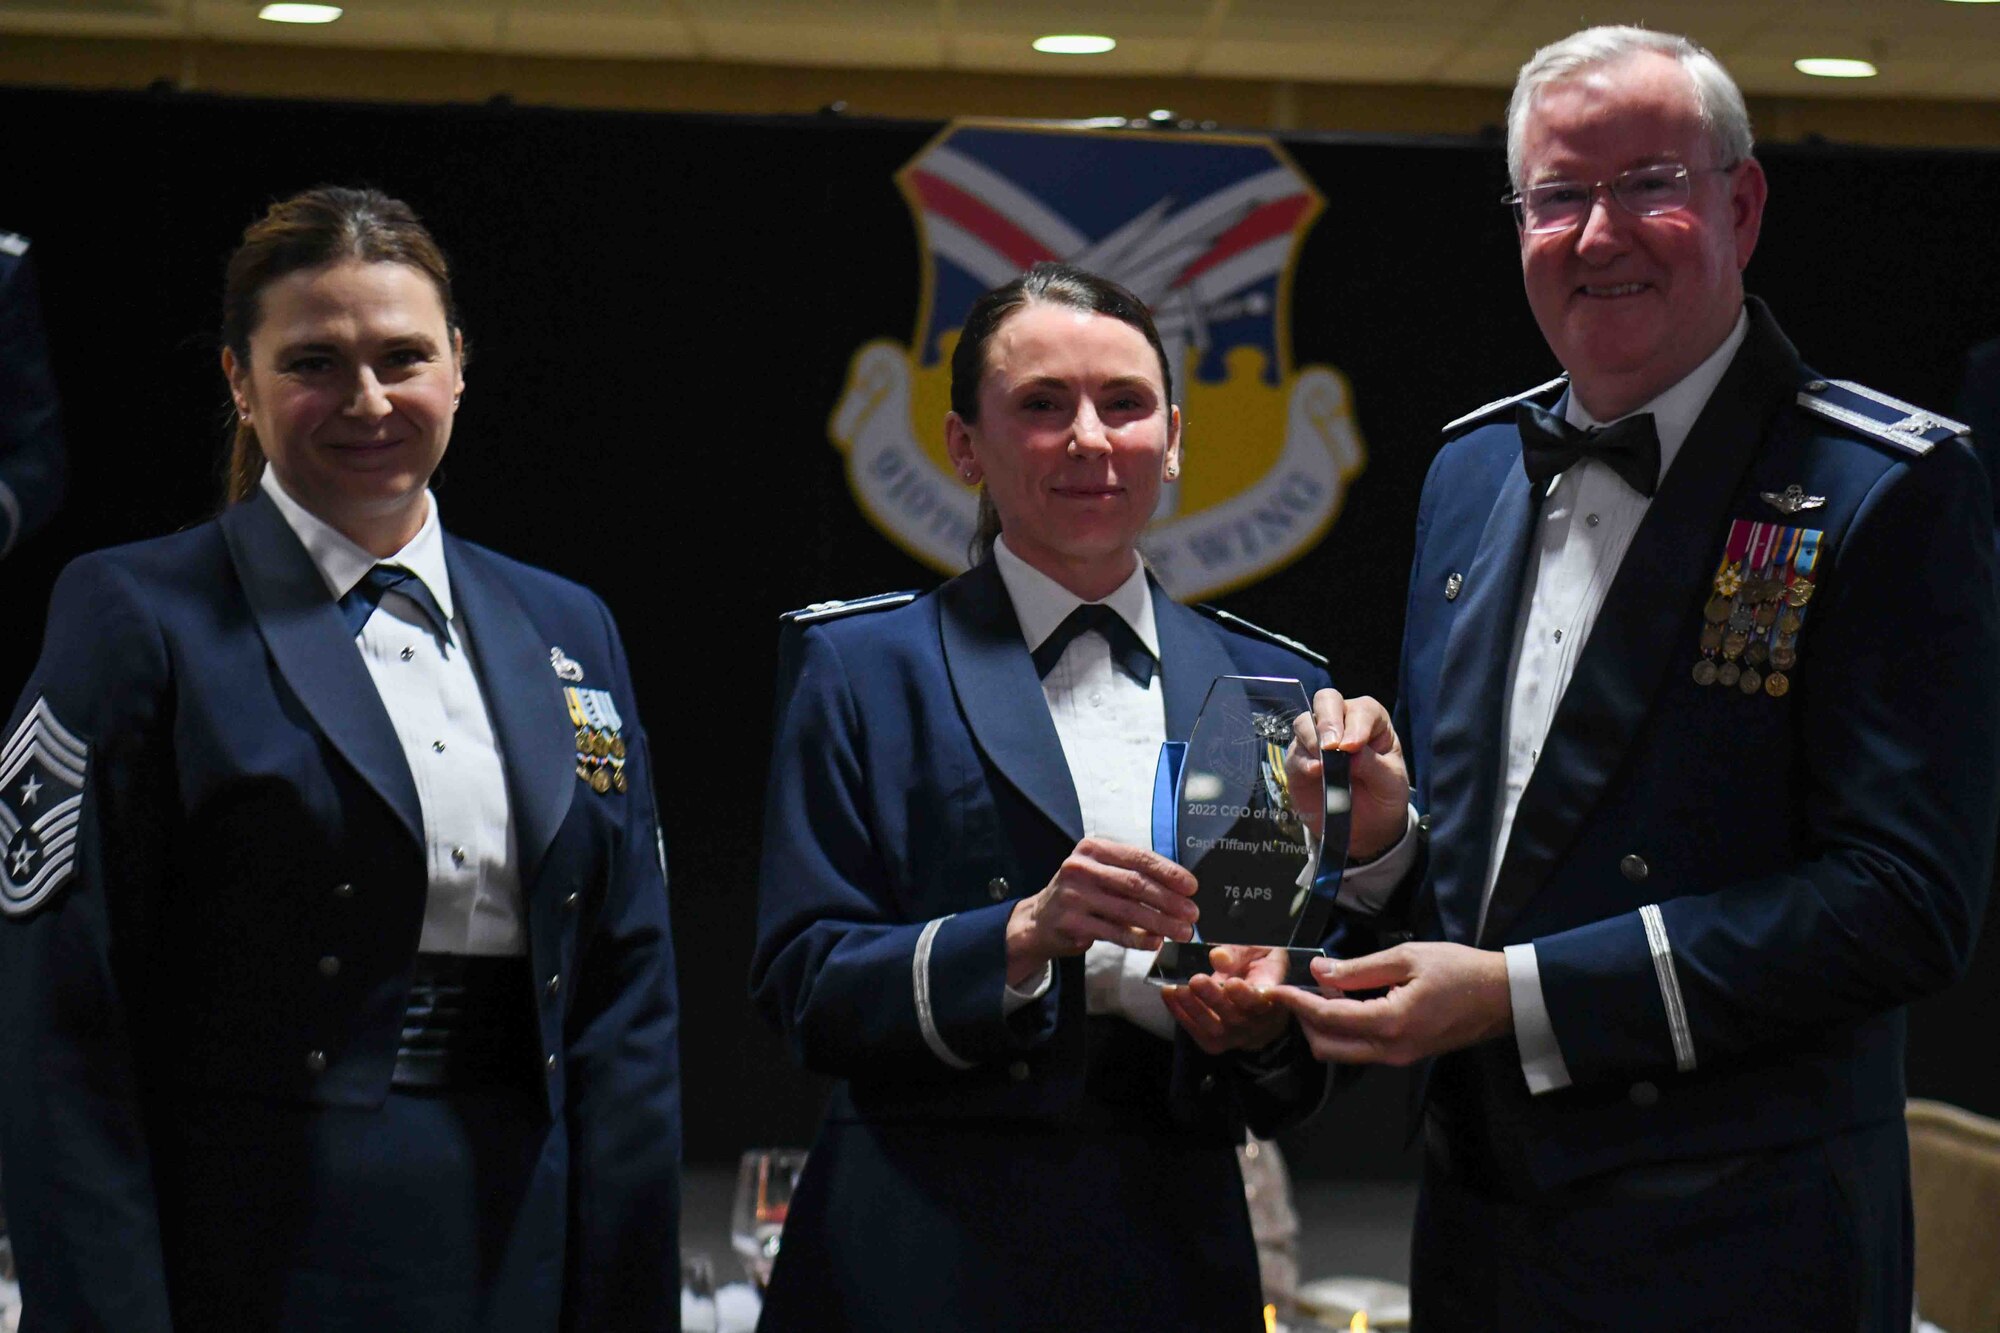 Capt. Tiffany Trivett (center), operations officer assigned to the 76th Aerial Port Squadron, receives the 2022 Company Grade Officer of the Year award from 910th Airlift Wing Commander Col. Jeff Van Dootingh (right) and 910th AW Command Chief Master Sgt. Jennifer McKendree (left), during the unit’s annual awards banquet, March 4, 2023, at Youngstown Air Reserve Station, Ohio.